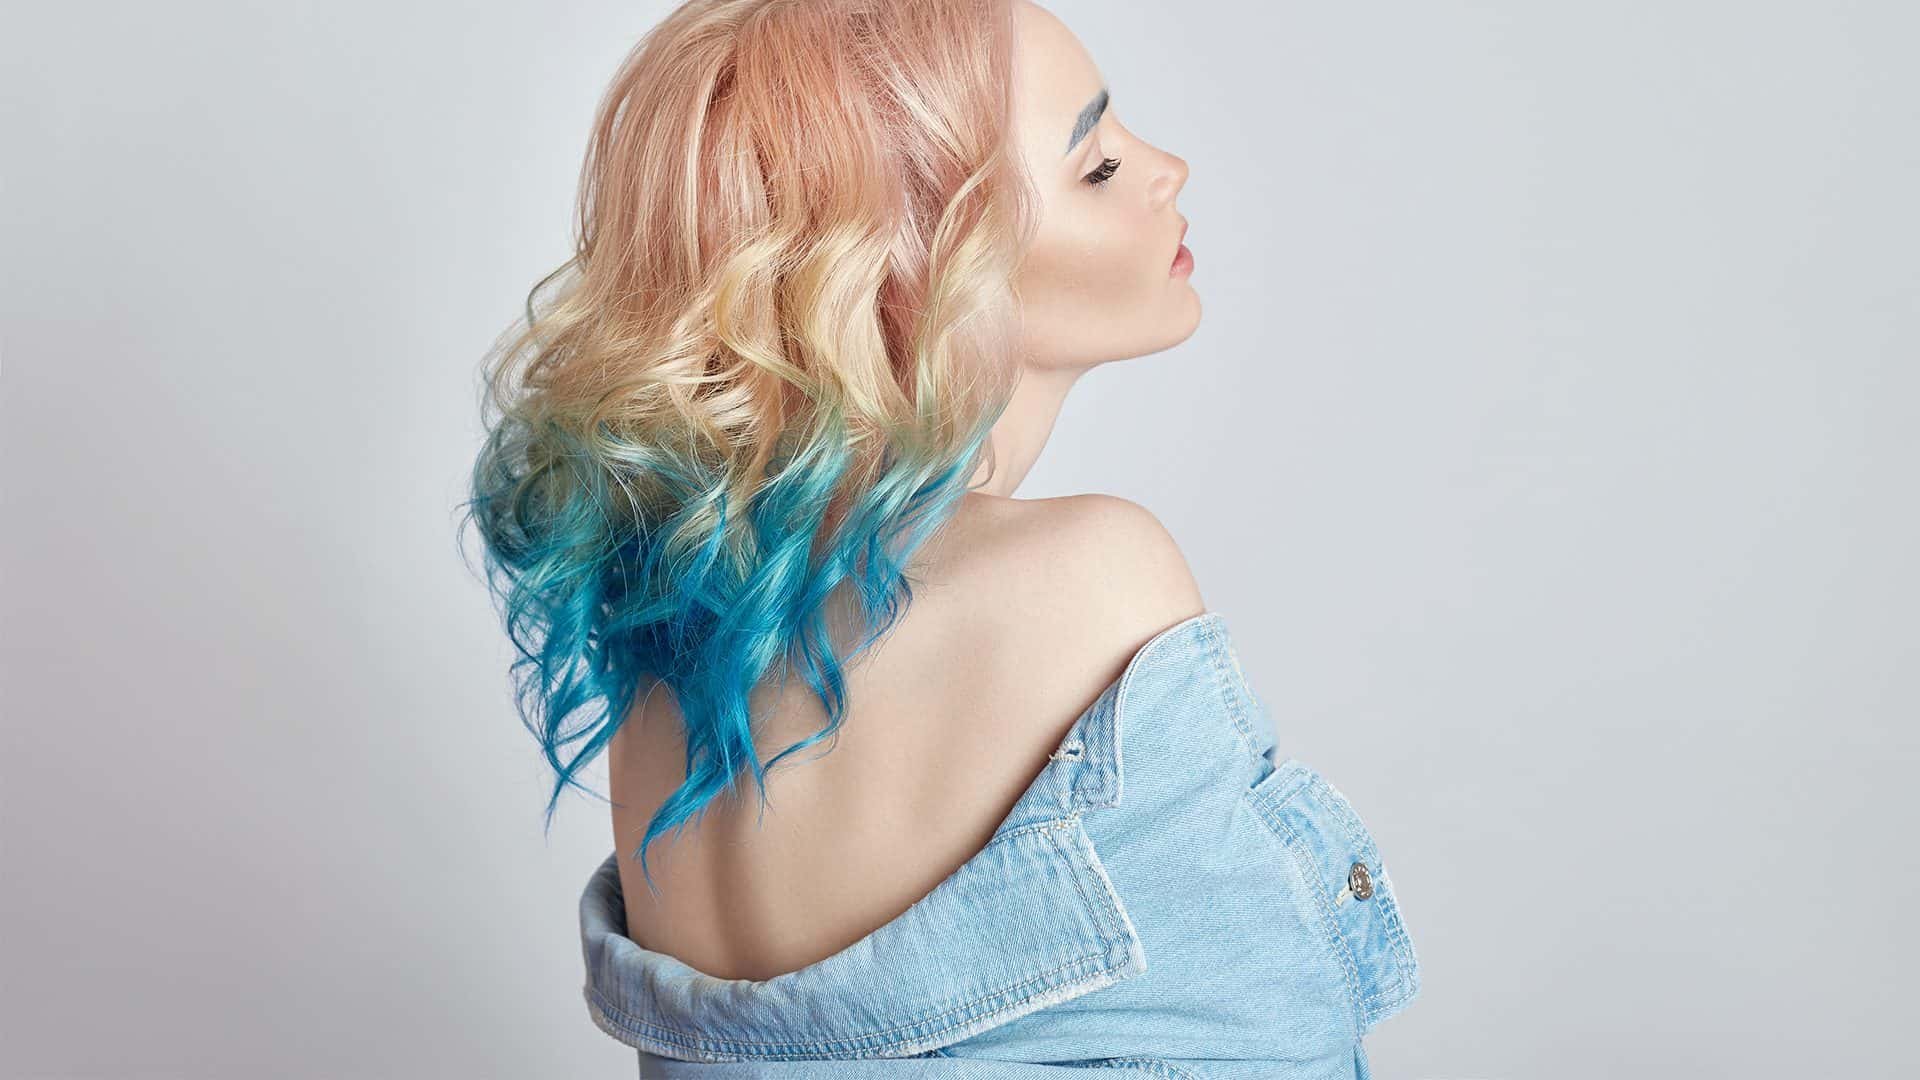 4. "Step-by-Step Guide to Dip Dyeing Your Hair in Green and Blue Shades" - wide 7